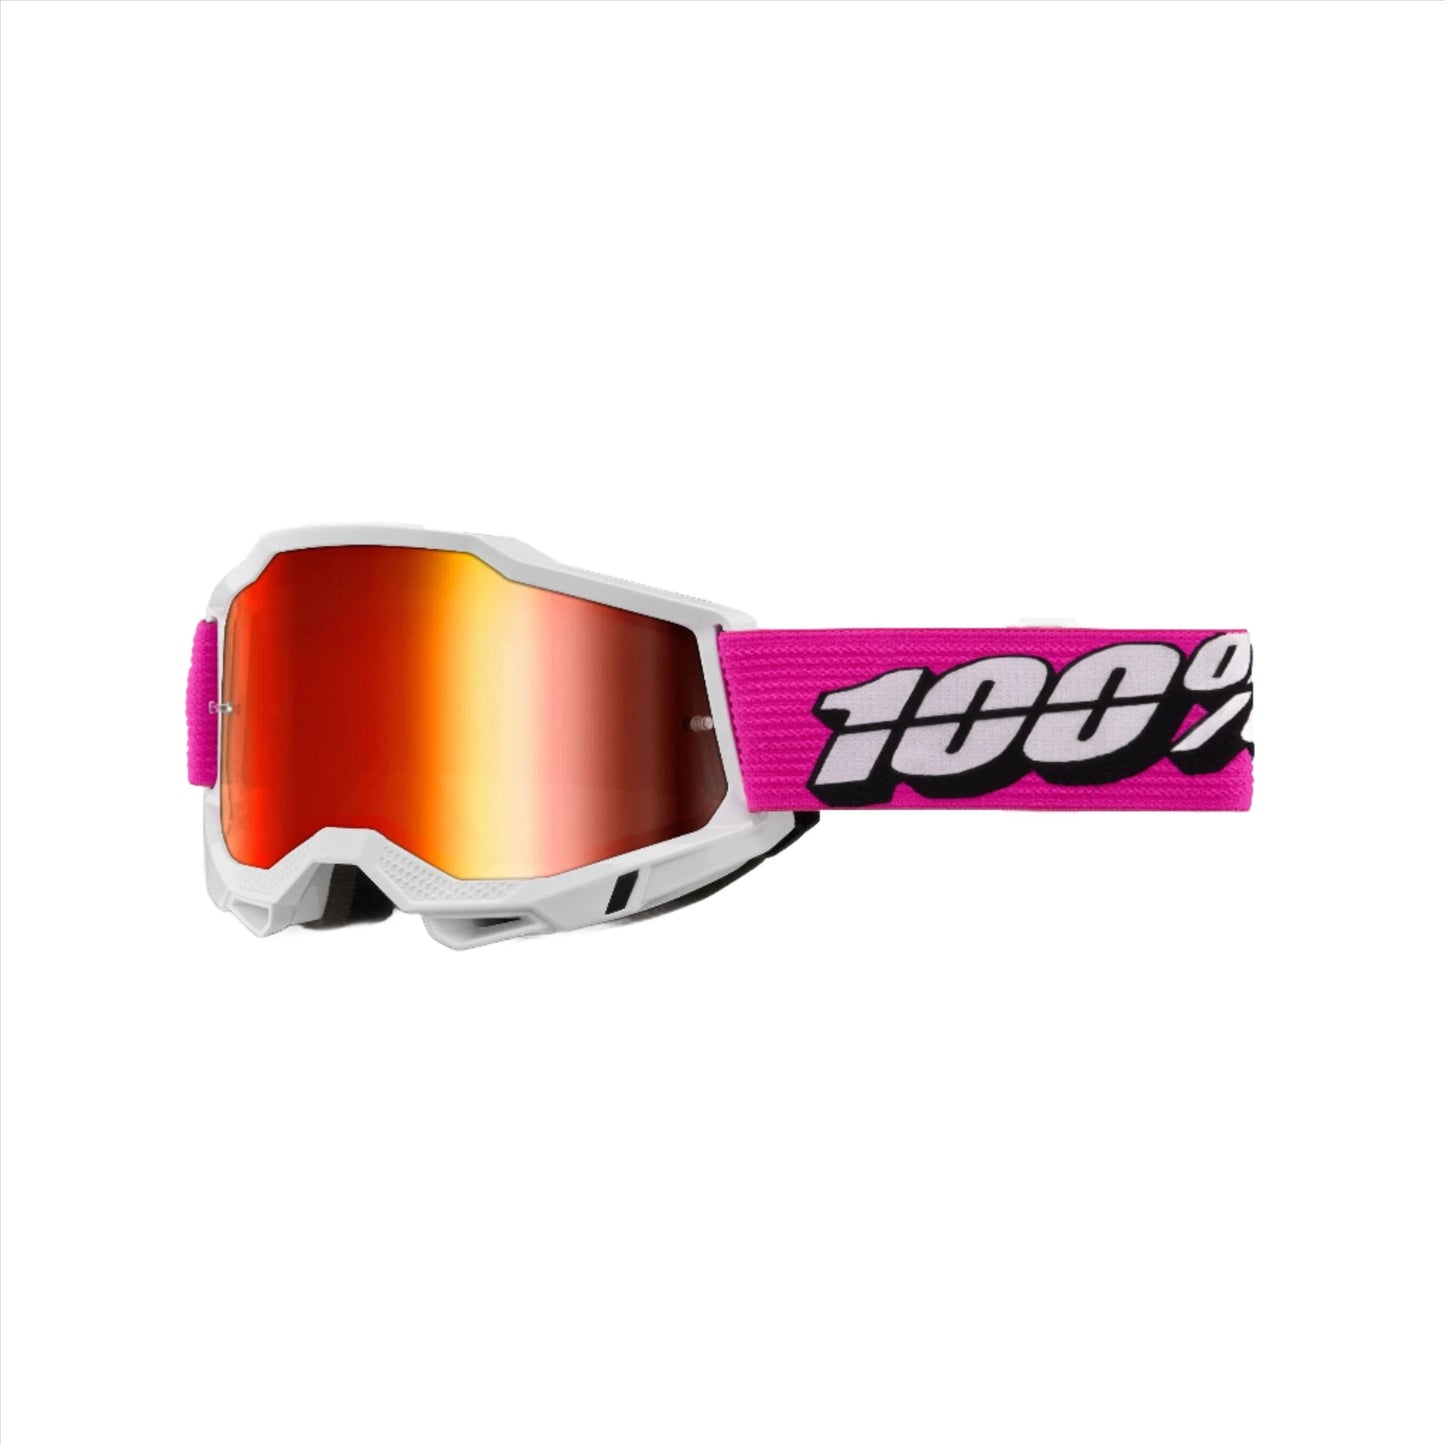 100 Percent Accuri 2 Goggles - One Size Fits Most - Roy - Mirror Red Lens